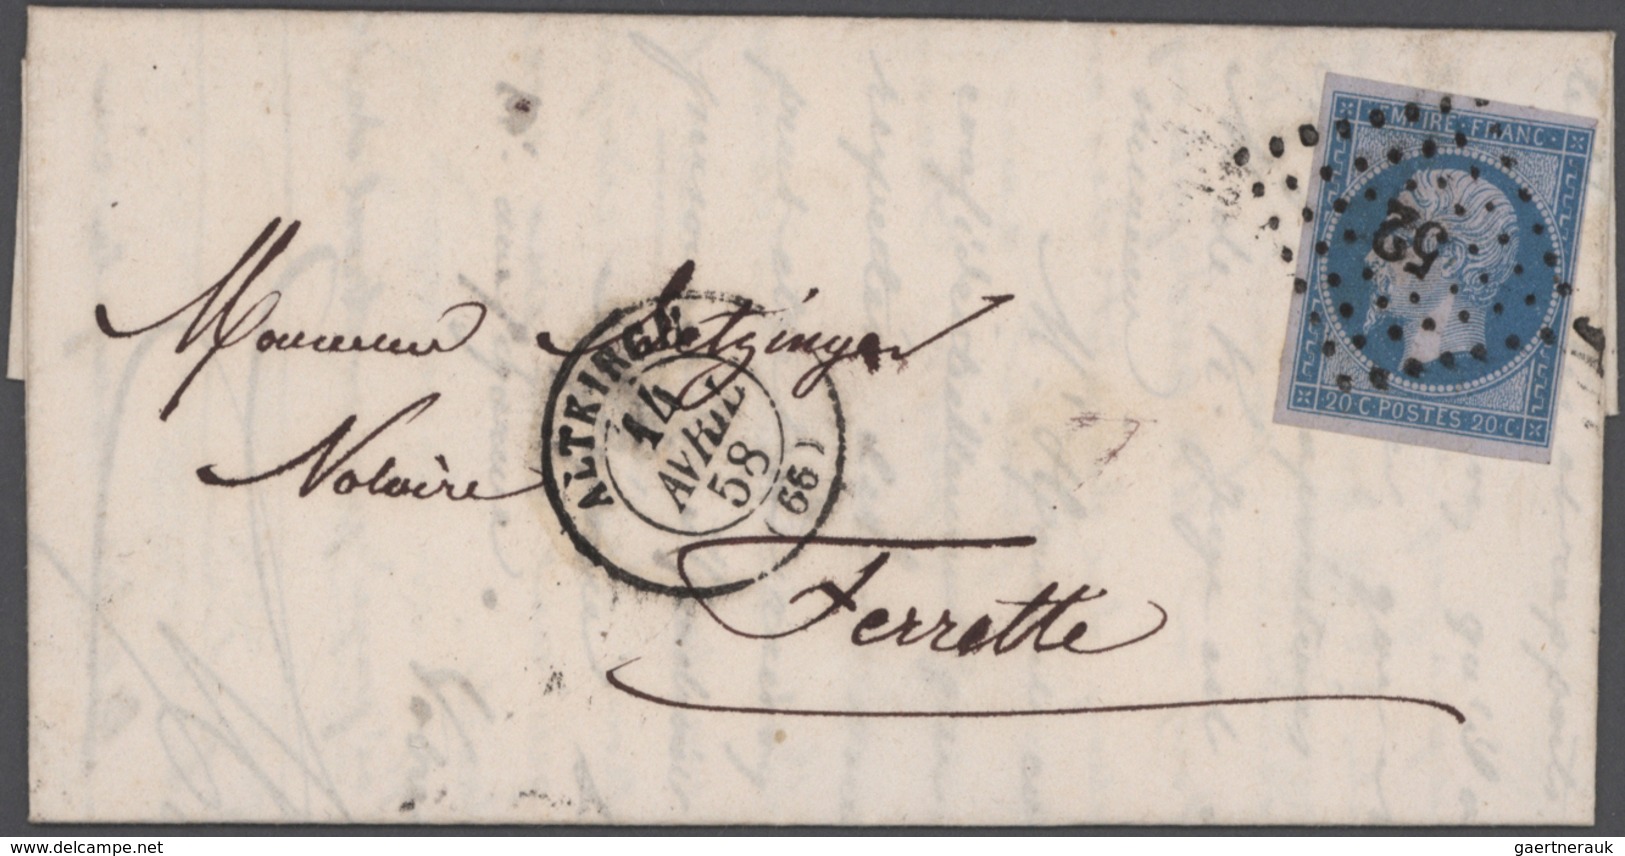 Frankreich: 1860/2000, holding of several hundred (and probably more than 1000) covers/cards/station